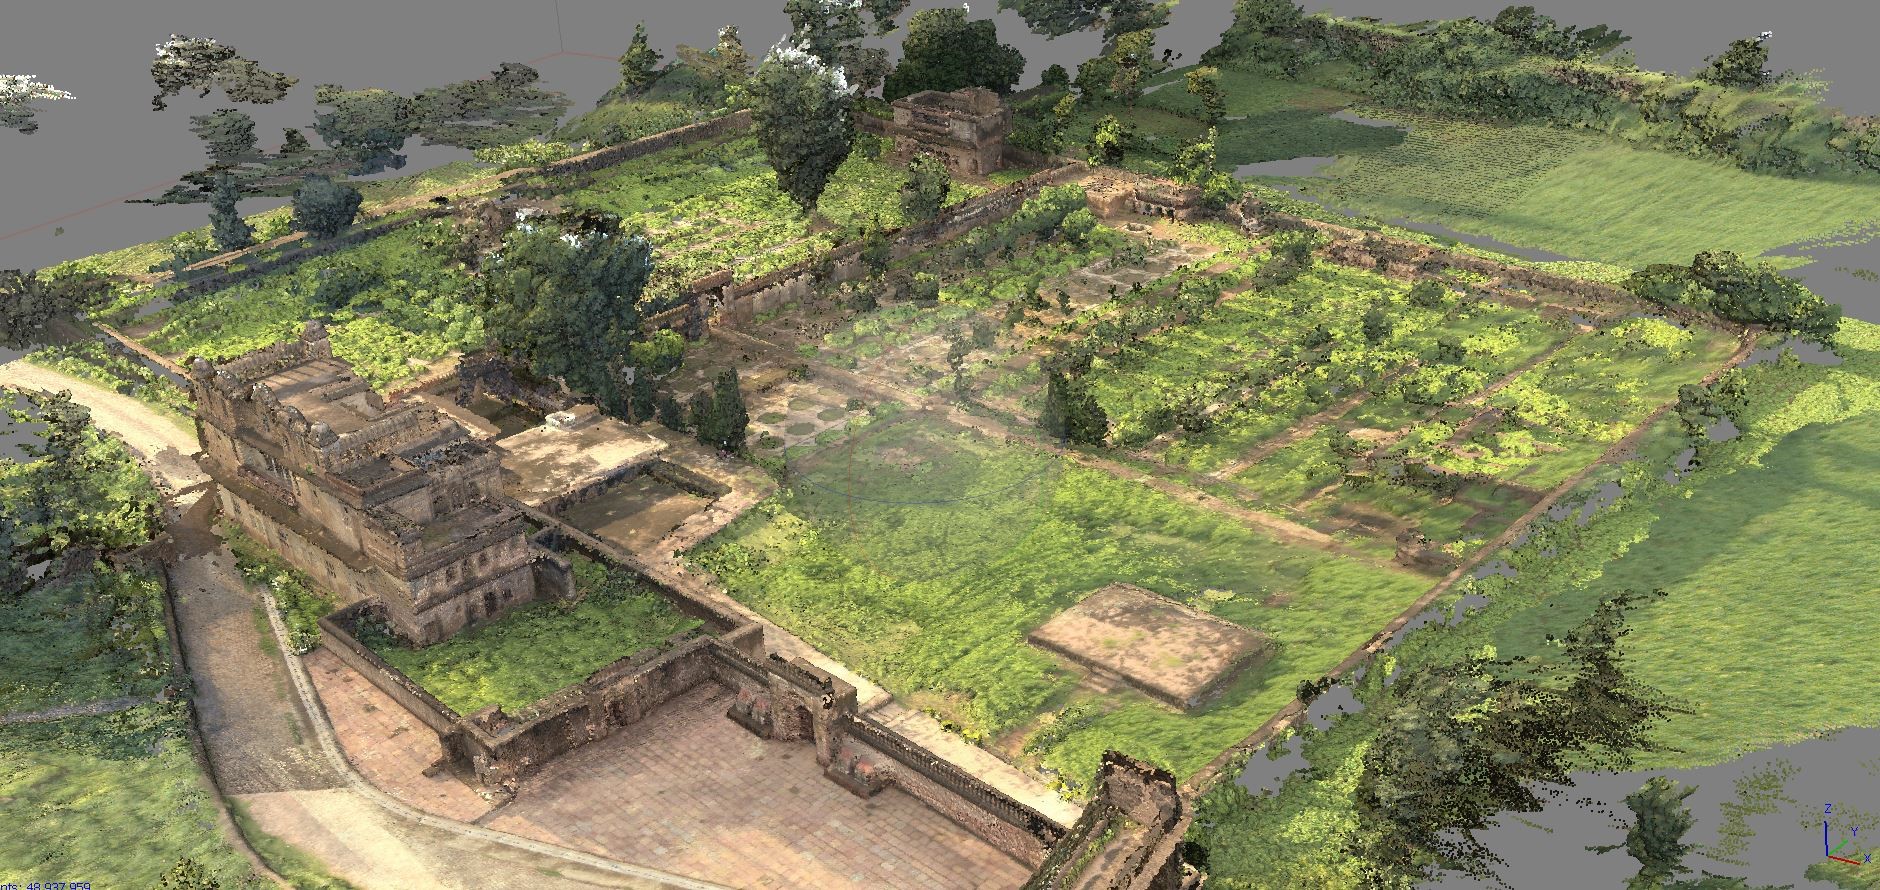 Rai Praveen Bagh in Orchha created by using aerial photogrammetry. © DHARATAL & INTACH Belgium.